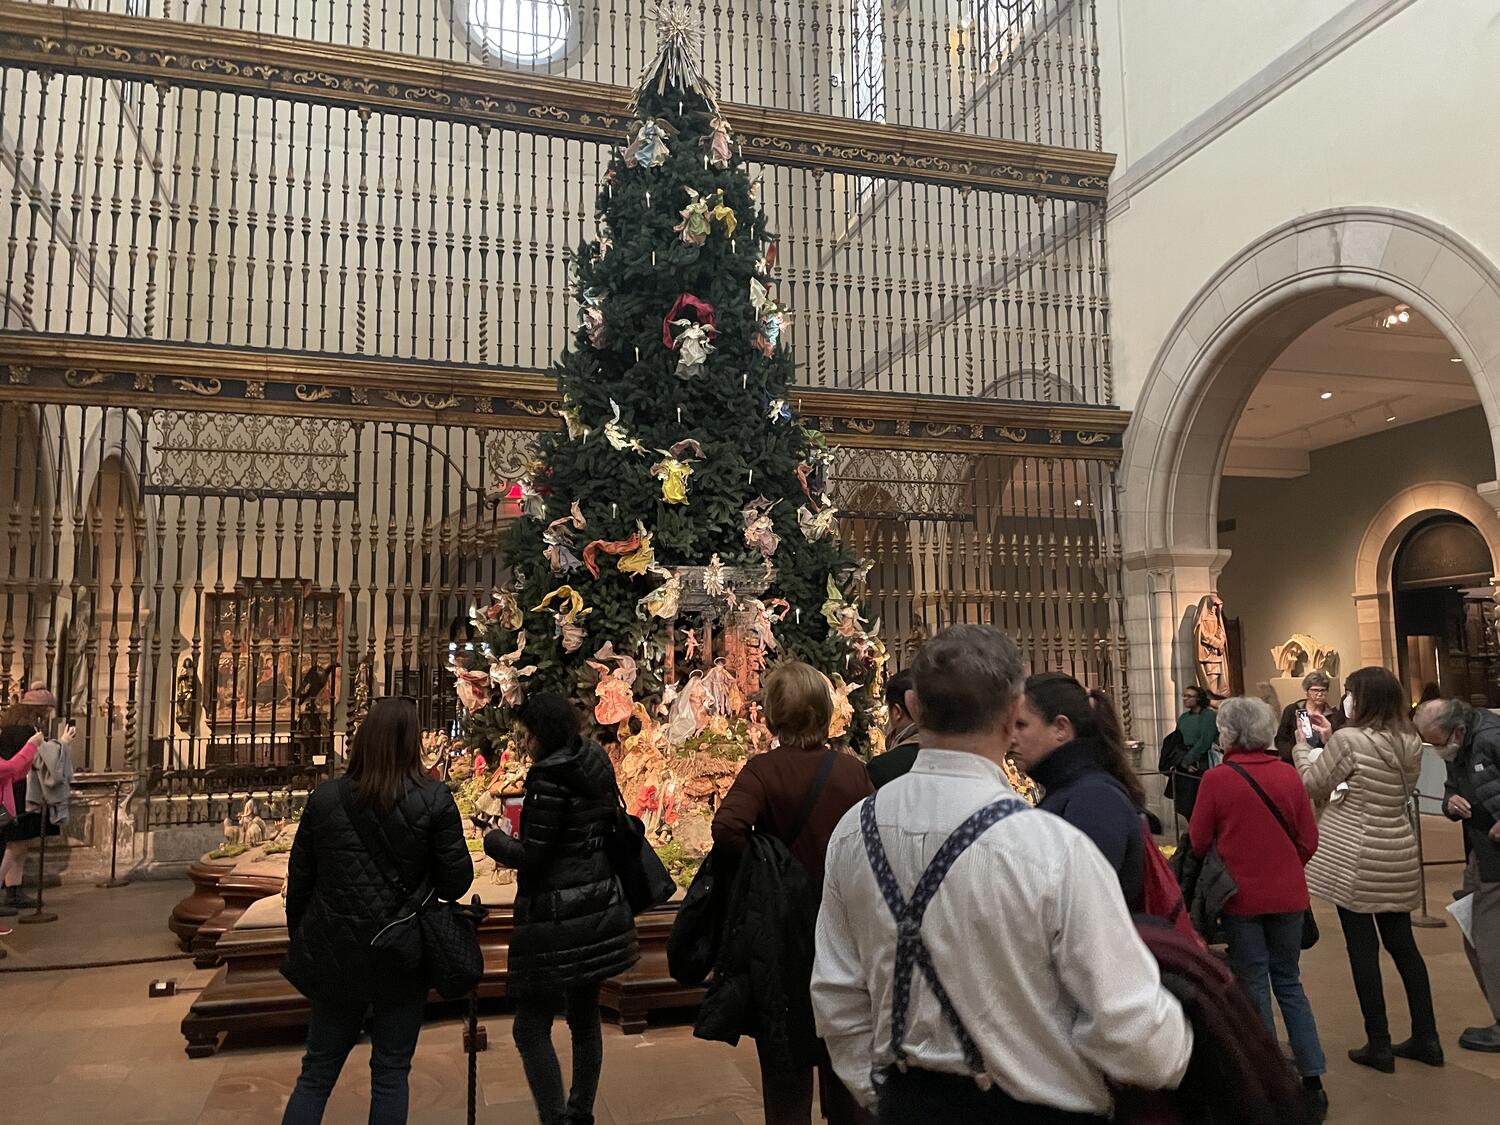 A big Christmas Tree in the Medieval Wing at the Met. It's covered in large angel sculptures and set in front of a grand metal screen that runs from floor to ceiling. Lots of people milling around.